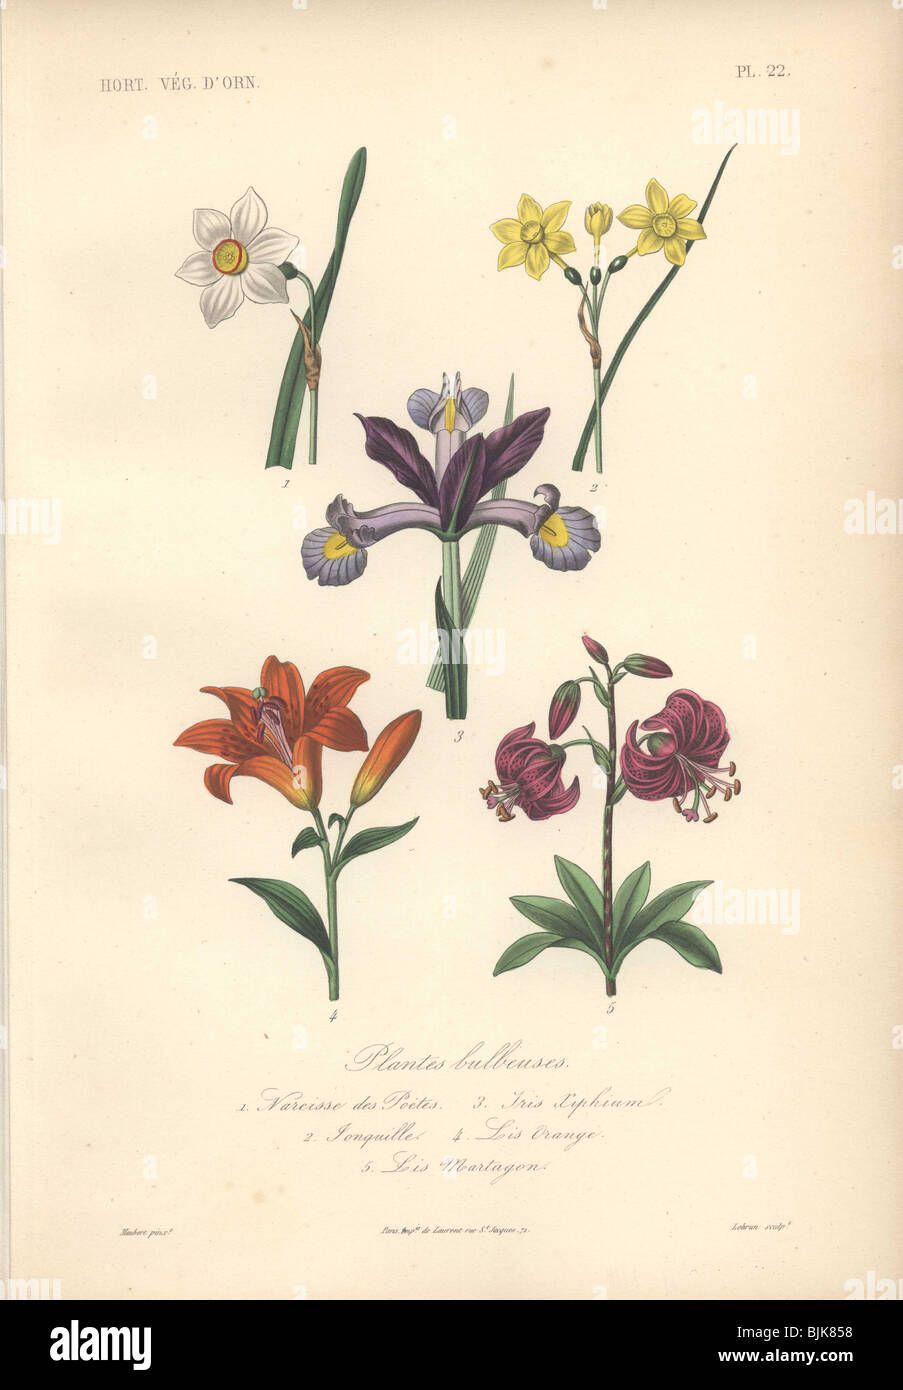 Decorative botanical print with daffodils, iris, lily and martagon lily from Herincq's 'Regne Vegetal' (1865). Stock Photo